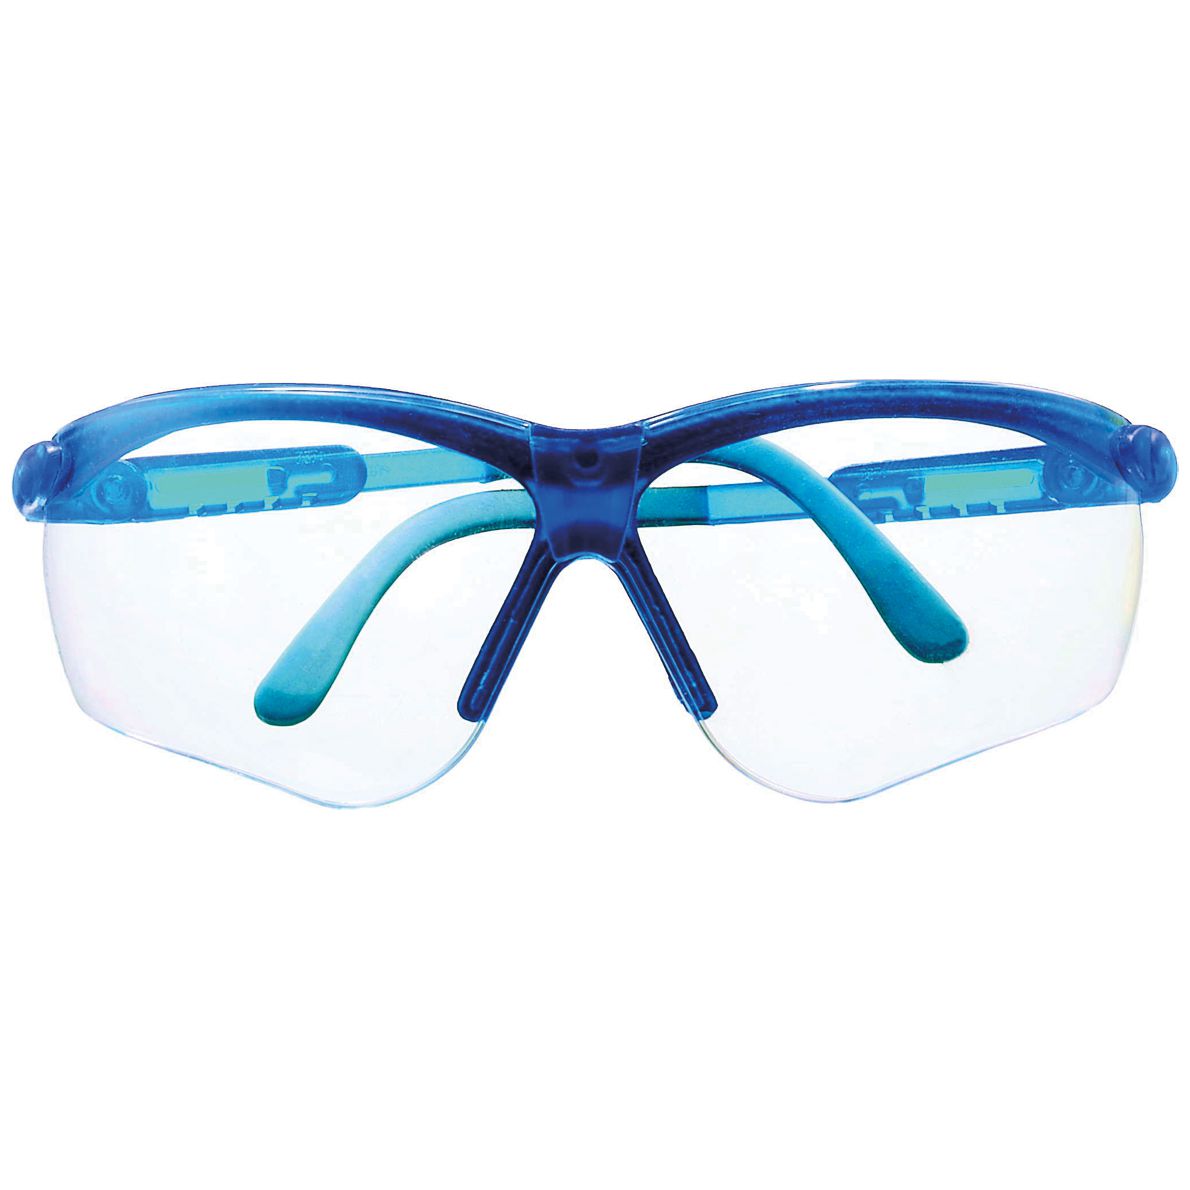 MSA Perspecta 010 safety glasses - scratch & fog resistant thanks to Sightgard coating - EN 166/170 - Blue/Clear